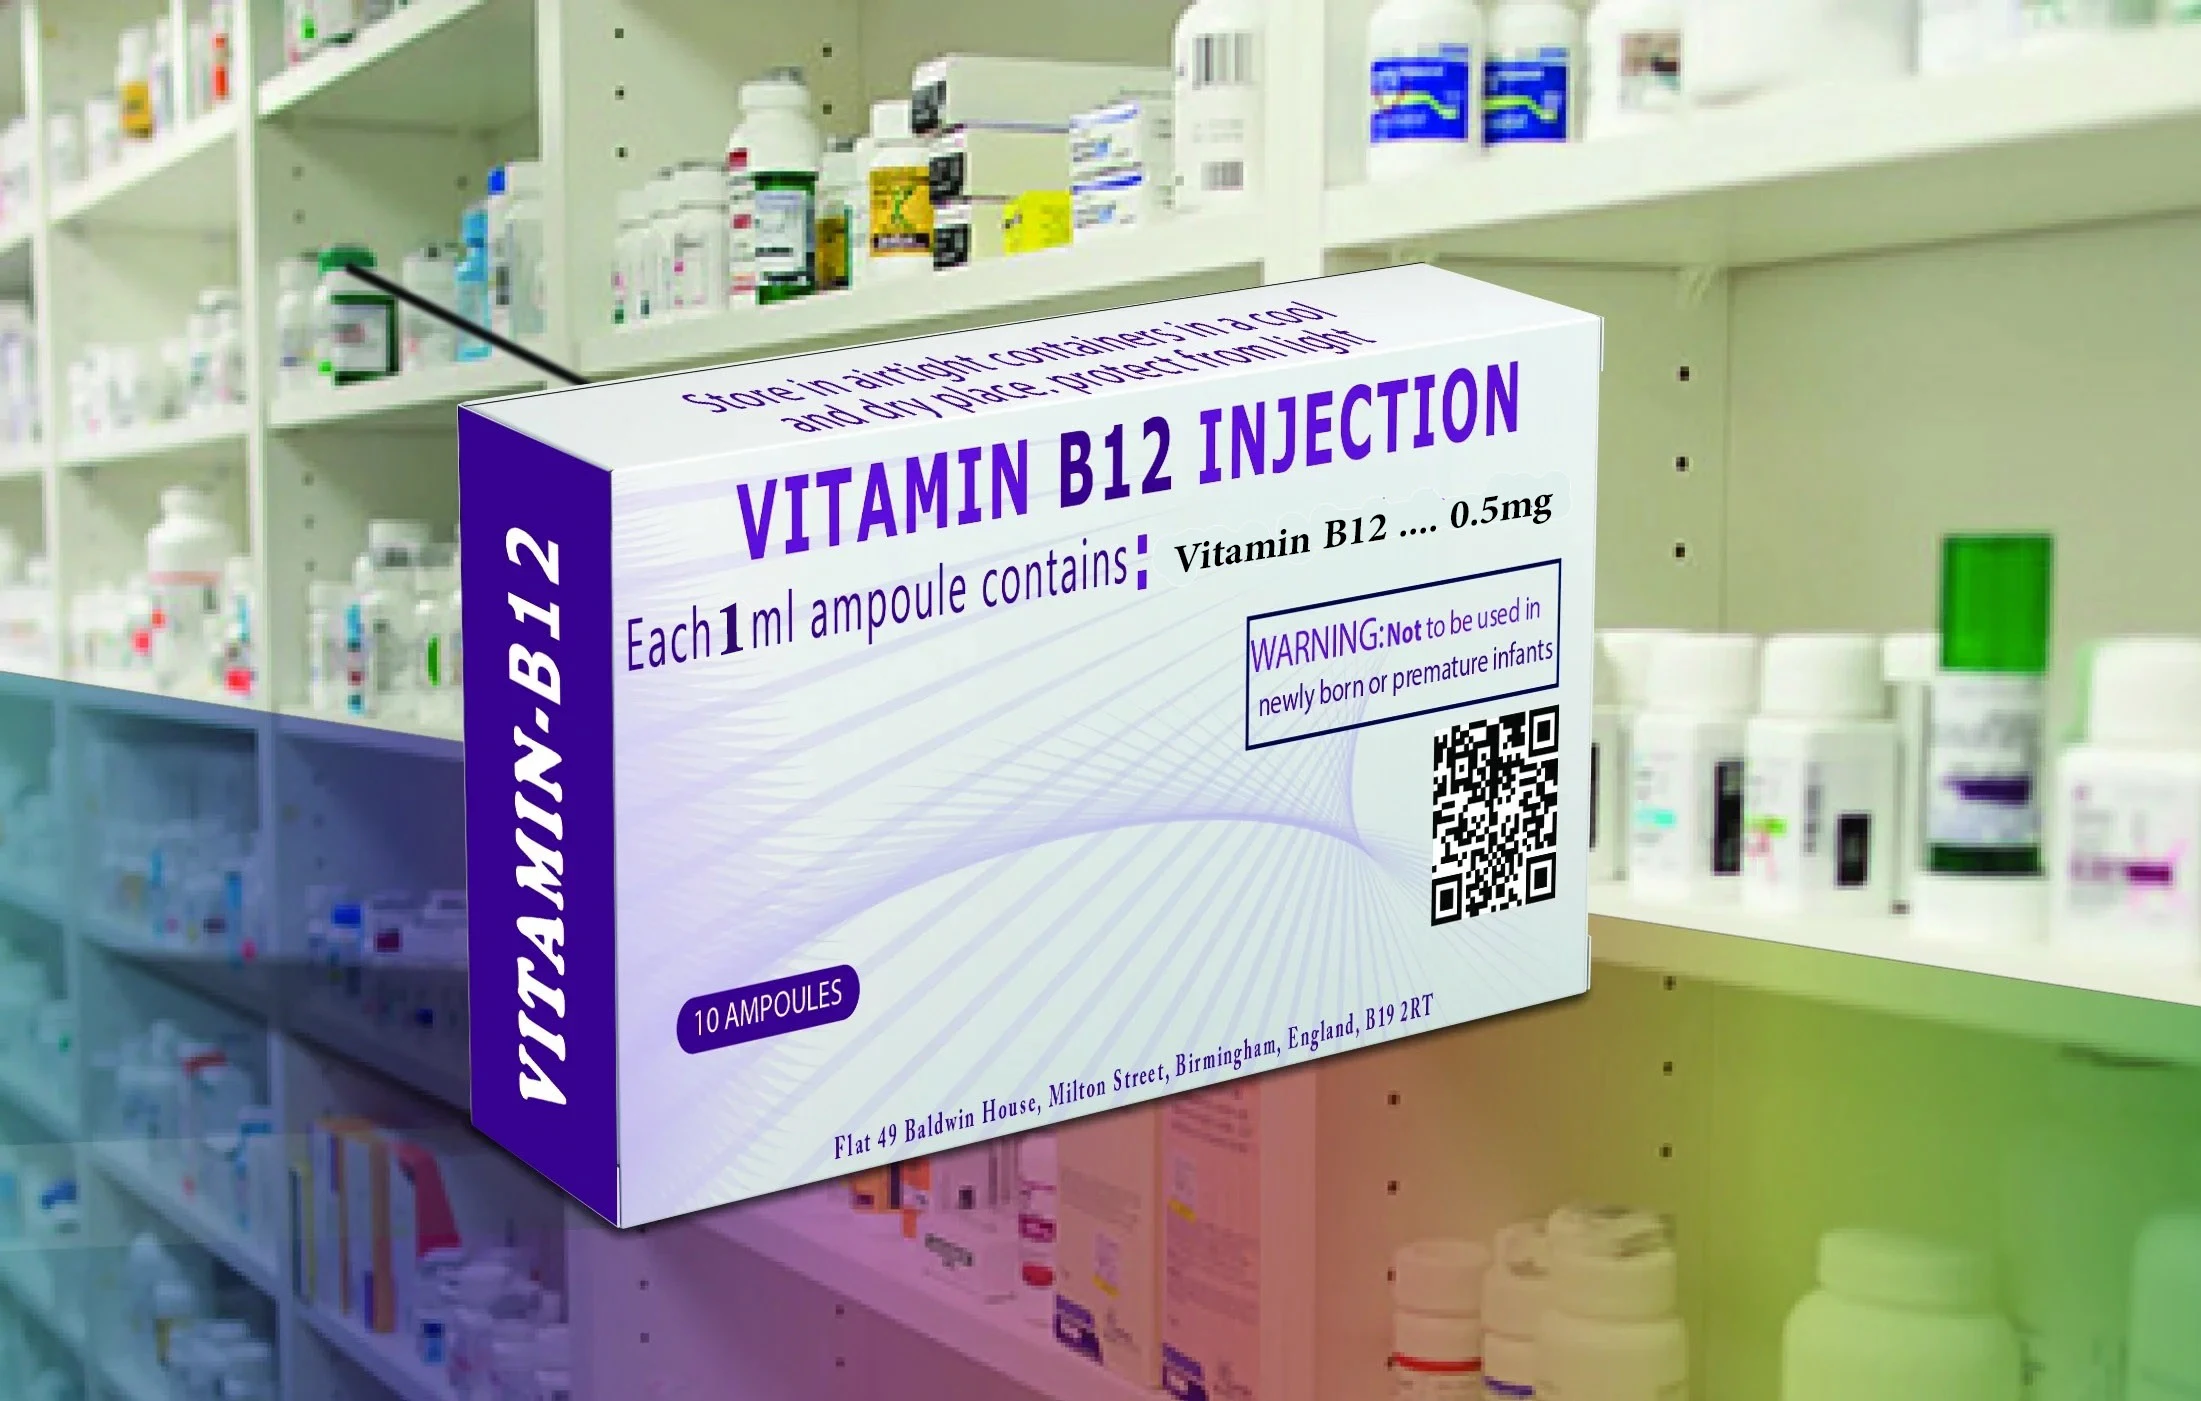 'Products registration', 'Vitamin b12 injection'